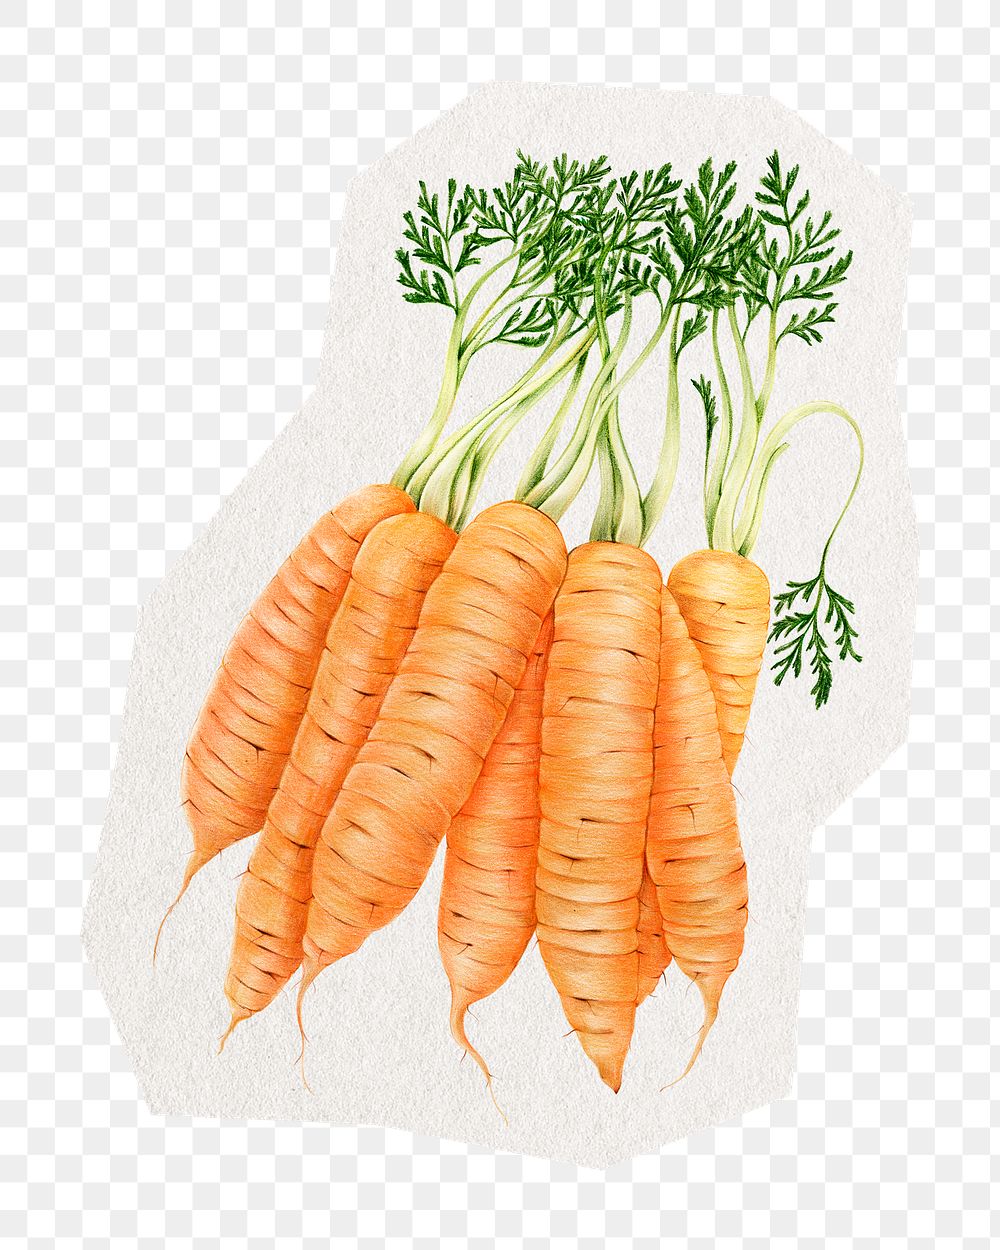 Carrot png collage element sticker, transparent background